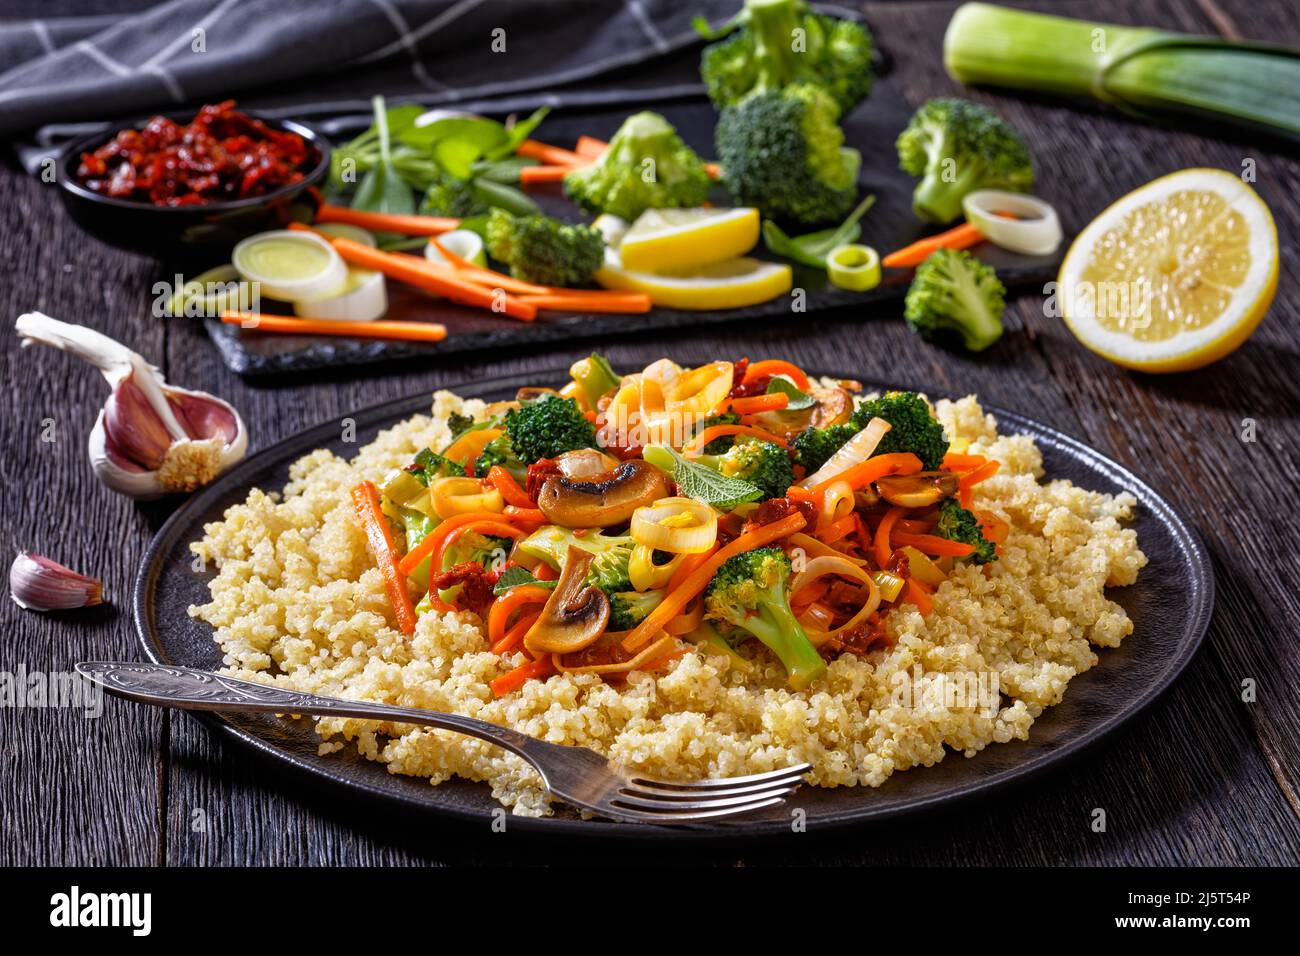 quinoa topped with stir fried broccoli, julienne carrots, sun dried tomatoes, leek and mushrooms on black plate on dark wooden table with ingredients Stock Photo